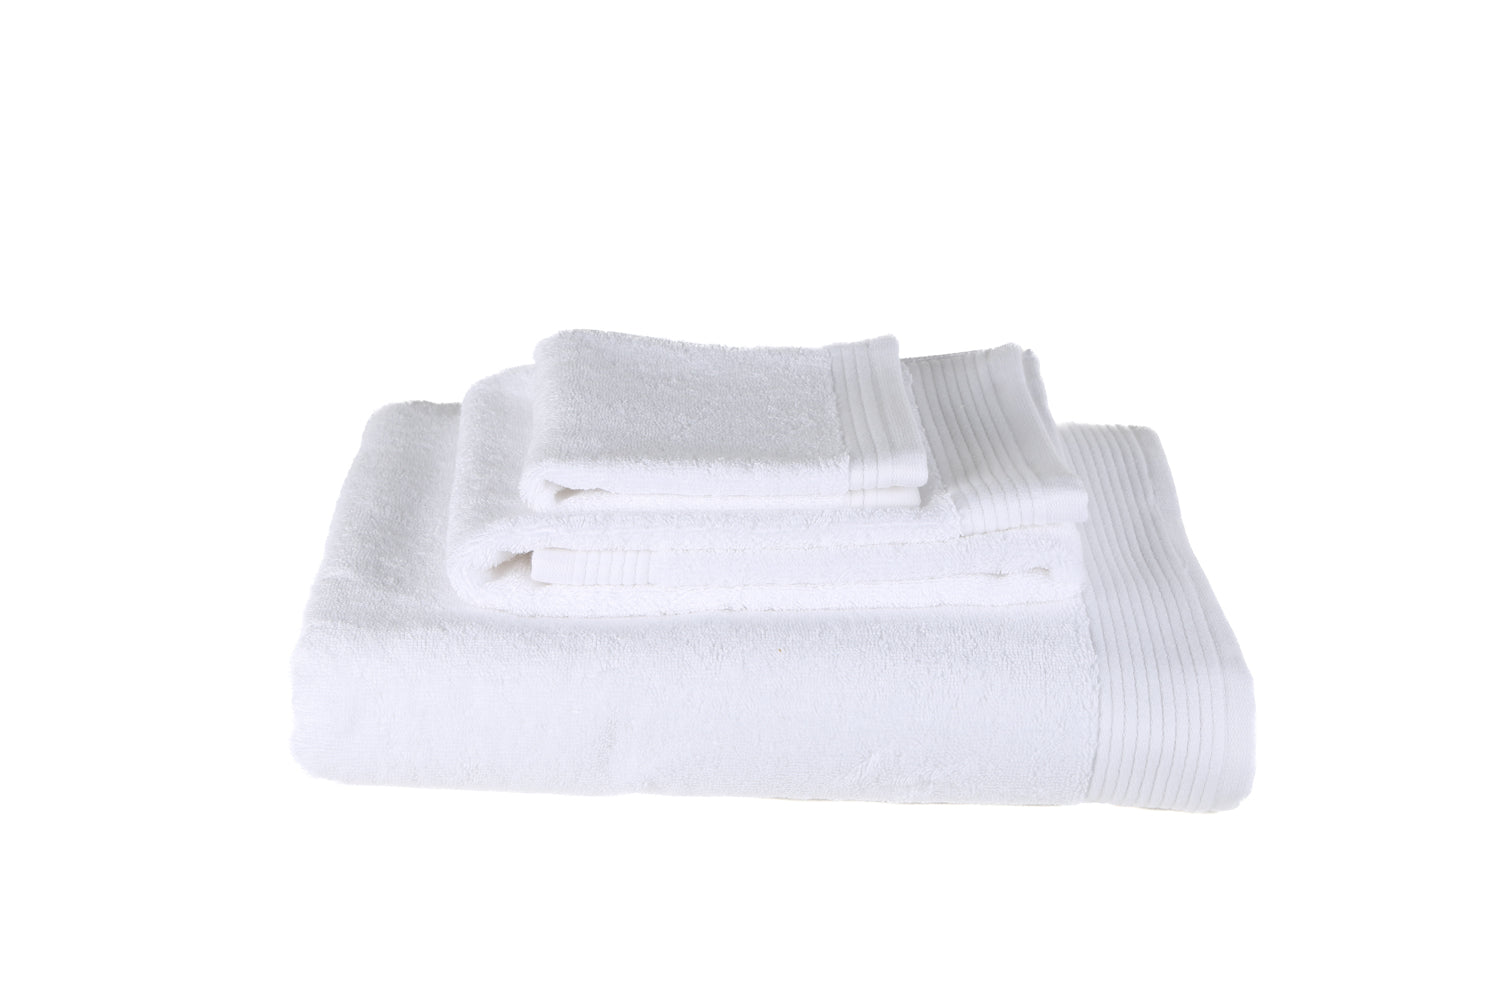 Luxury, Hotel Quality Towel Sets from Sobel, Order Direct